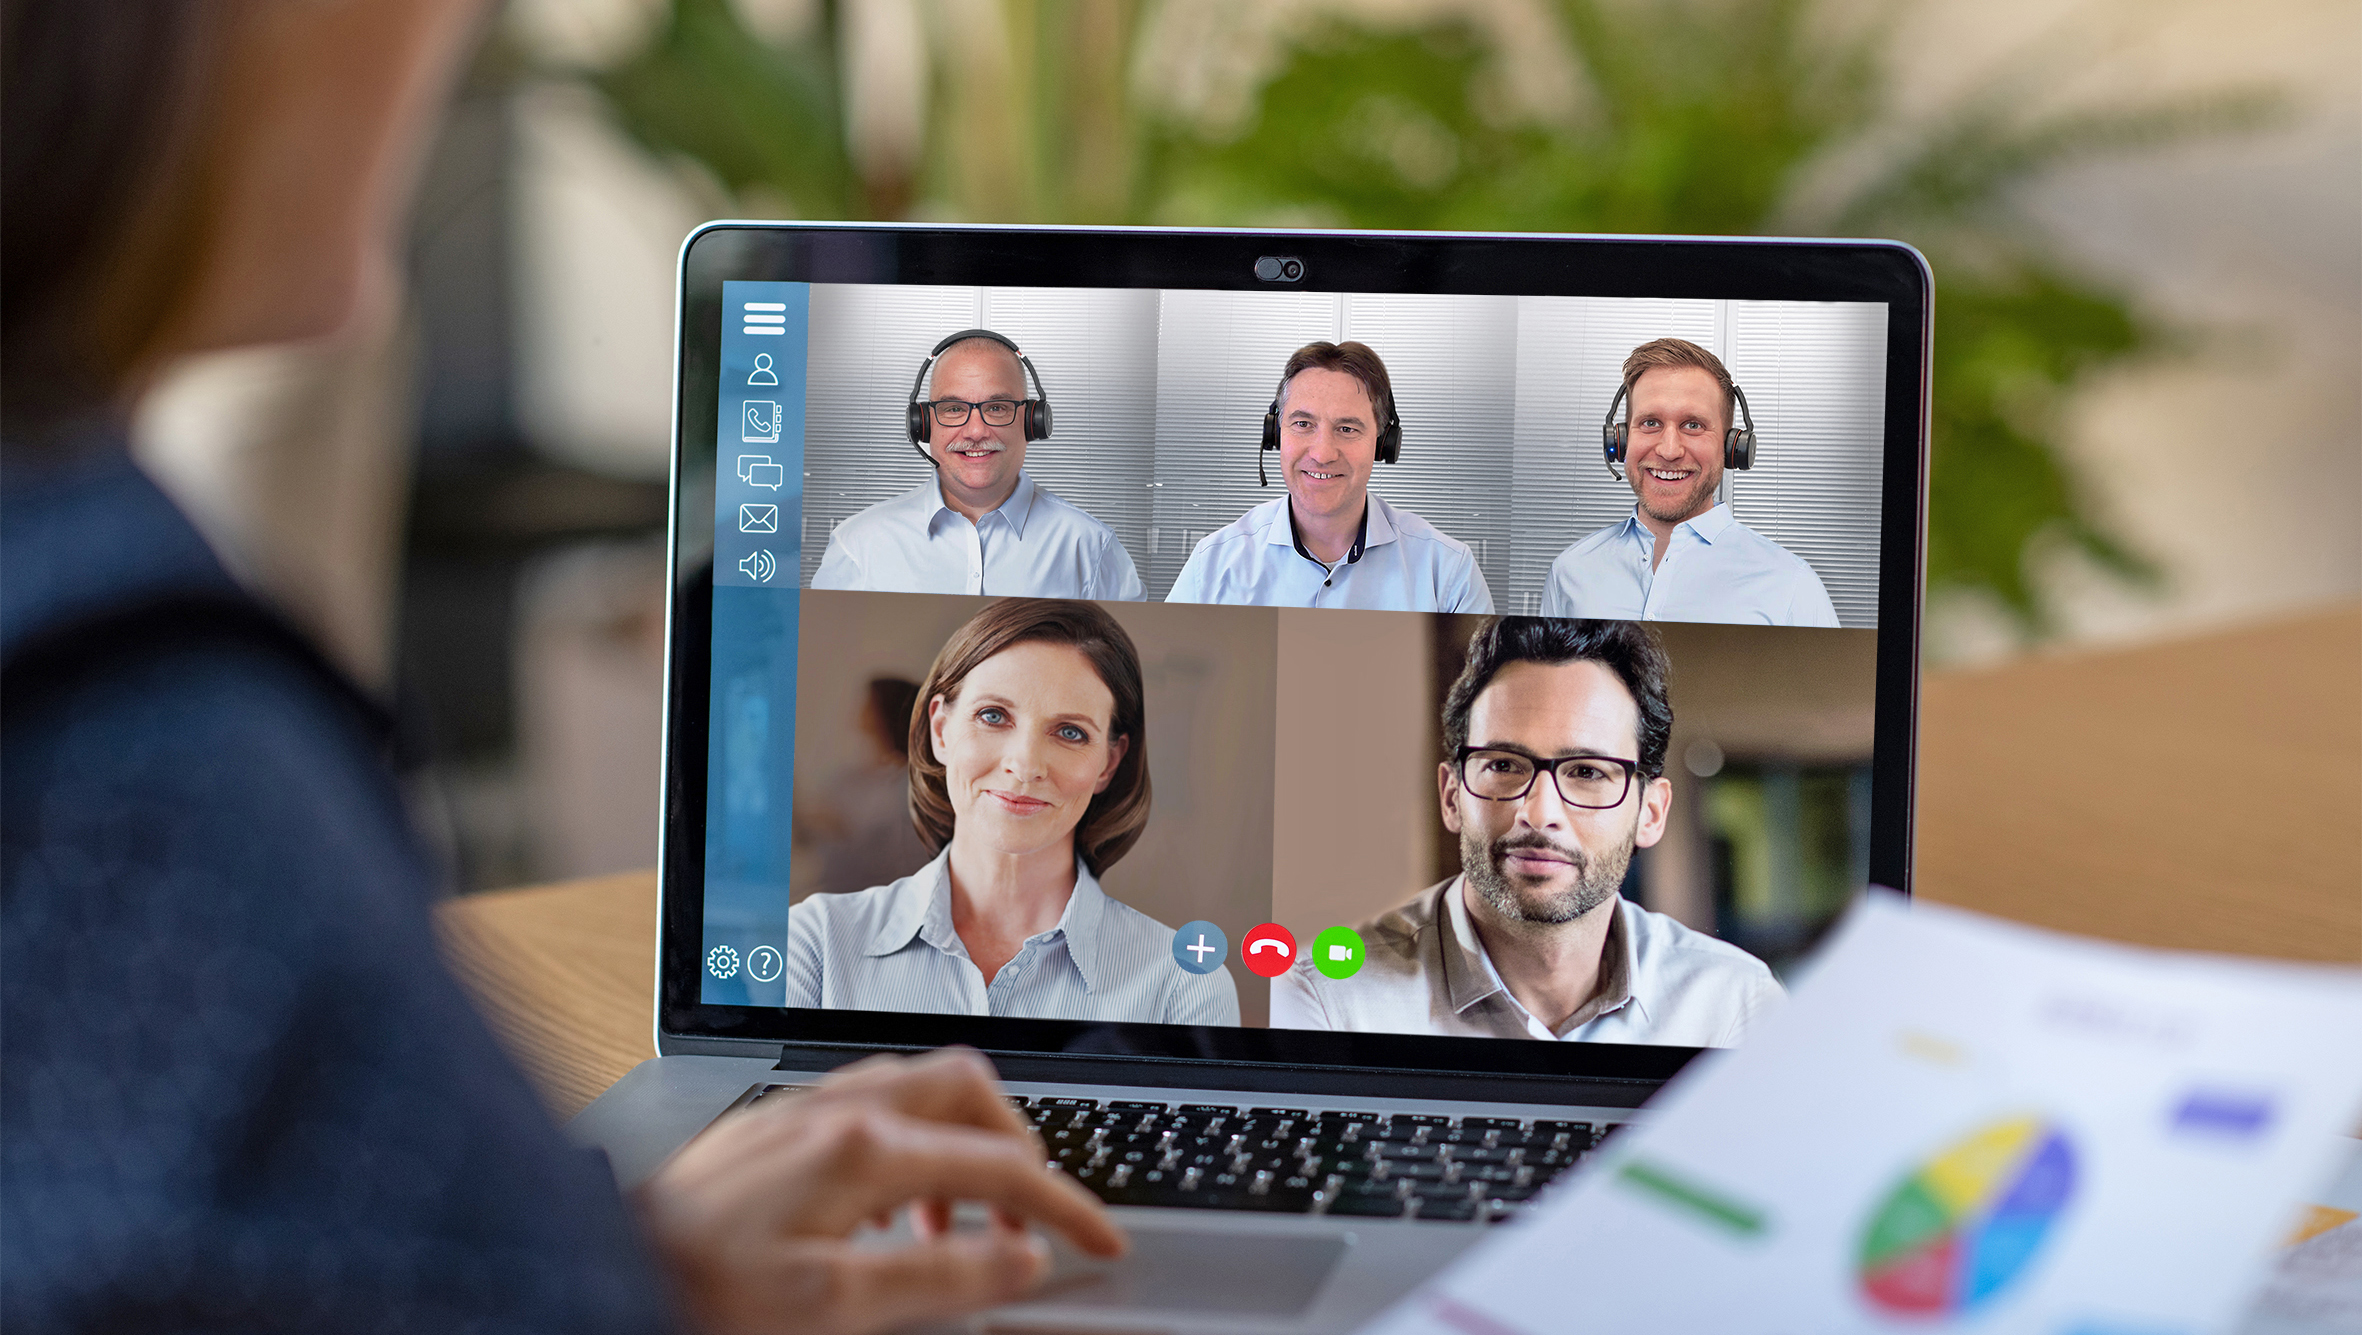 Laptop monitor shows multiple people in an online meeting